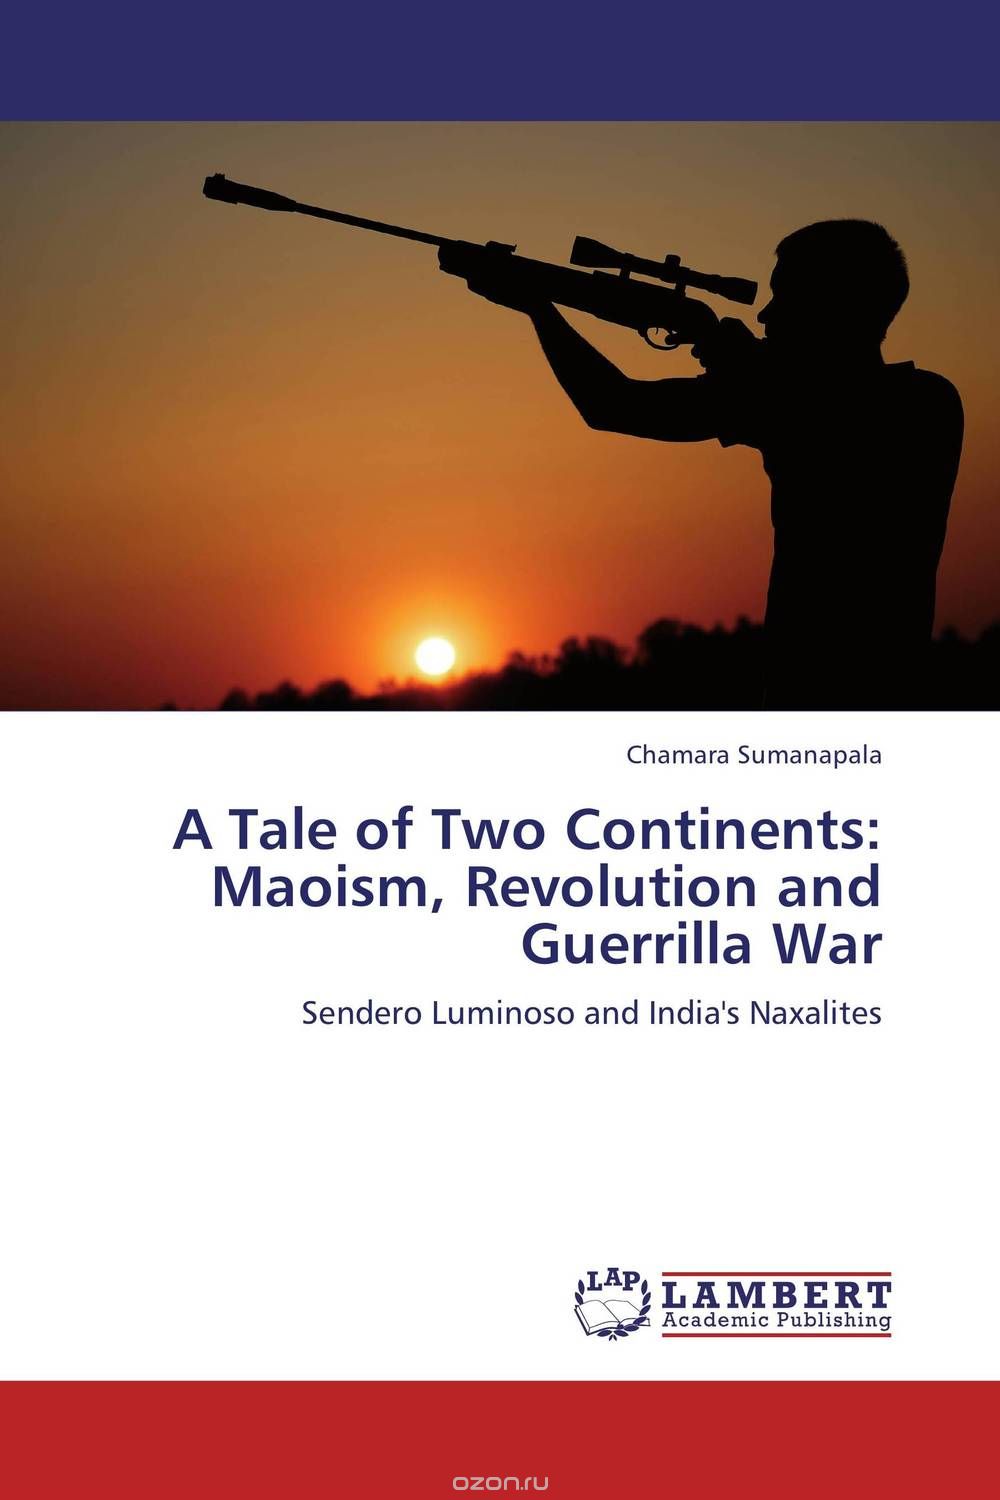 A Tale of Two Continents: Maoism, Revolution and Guerrilla War